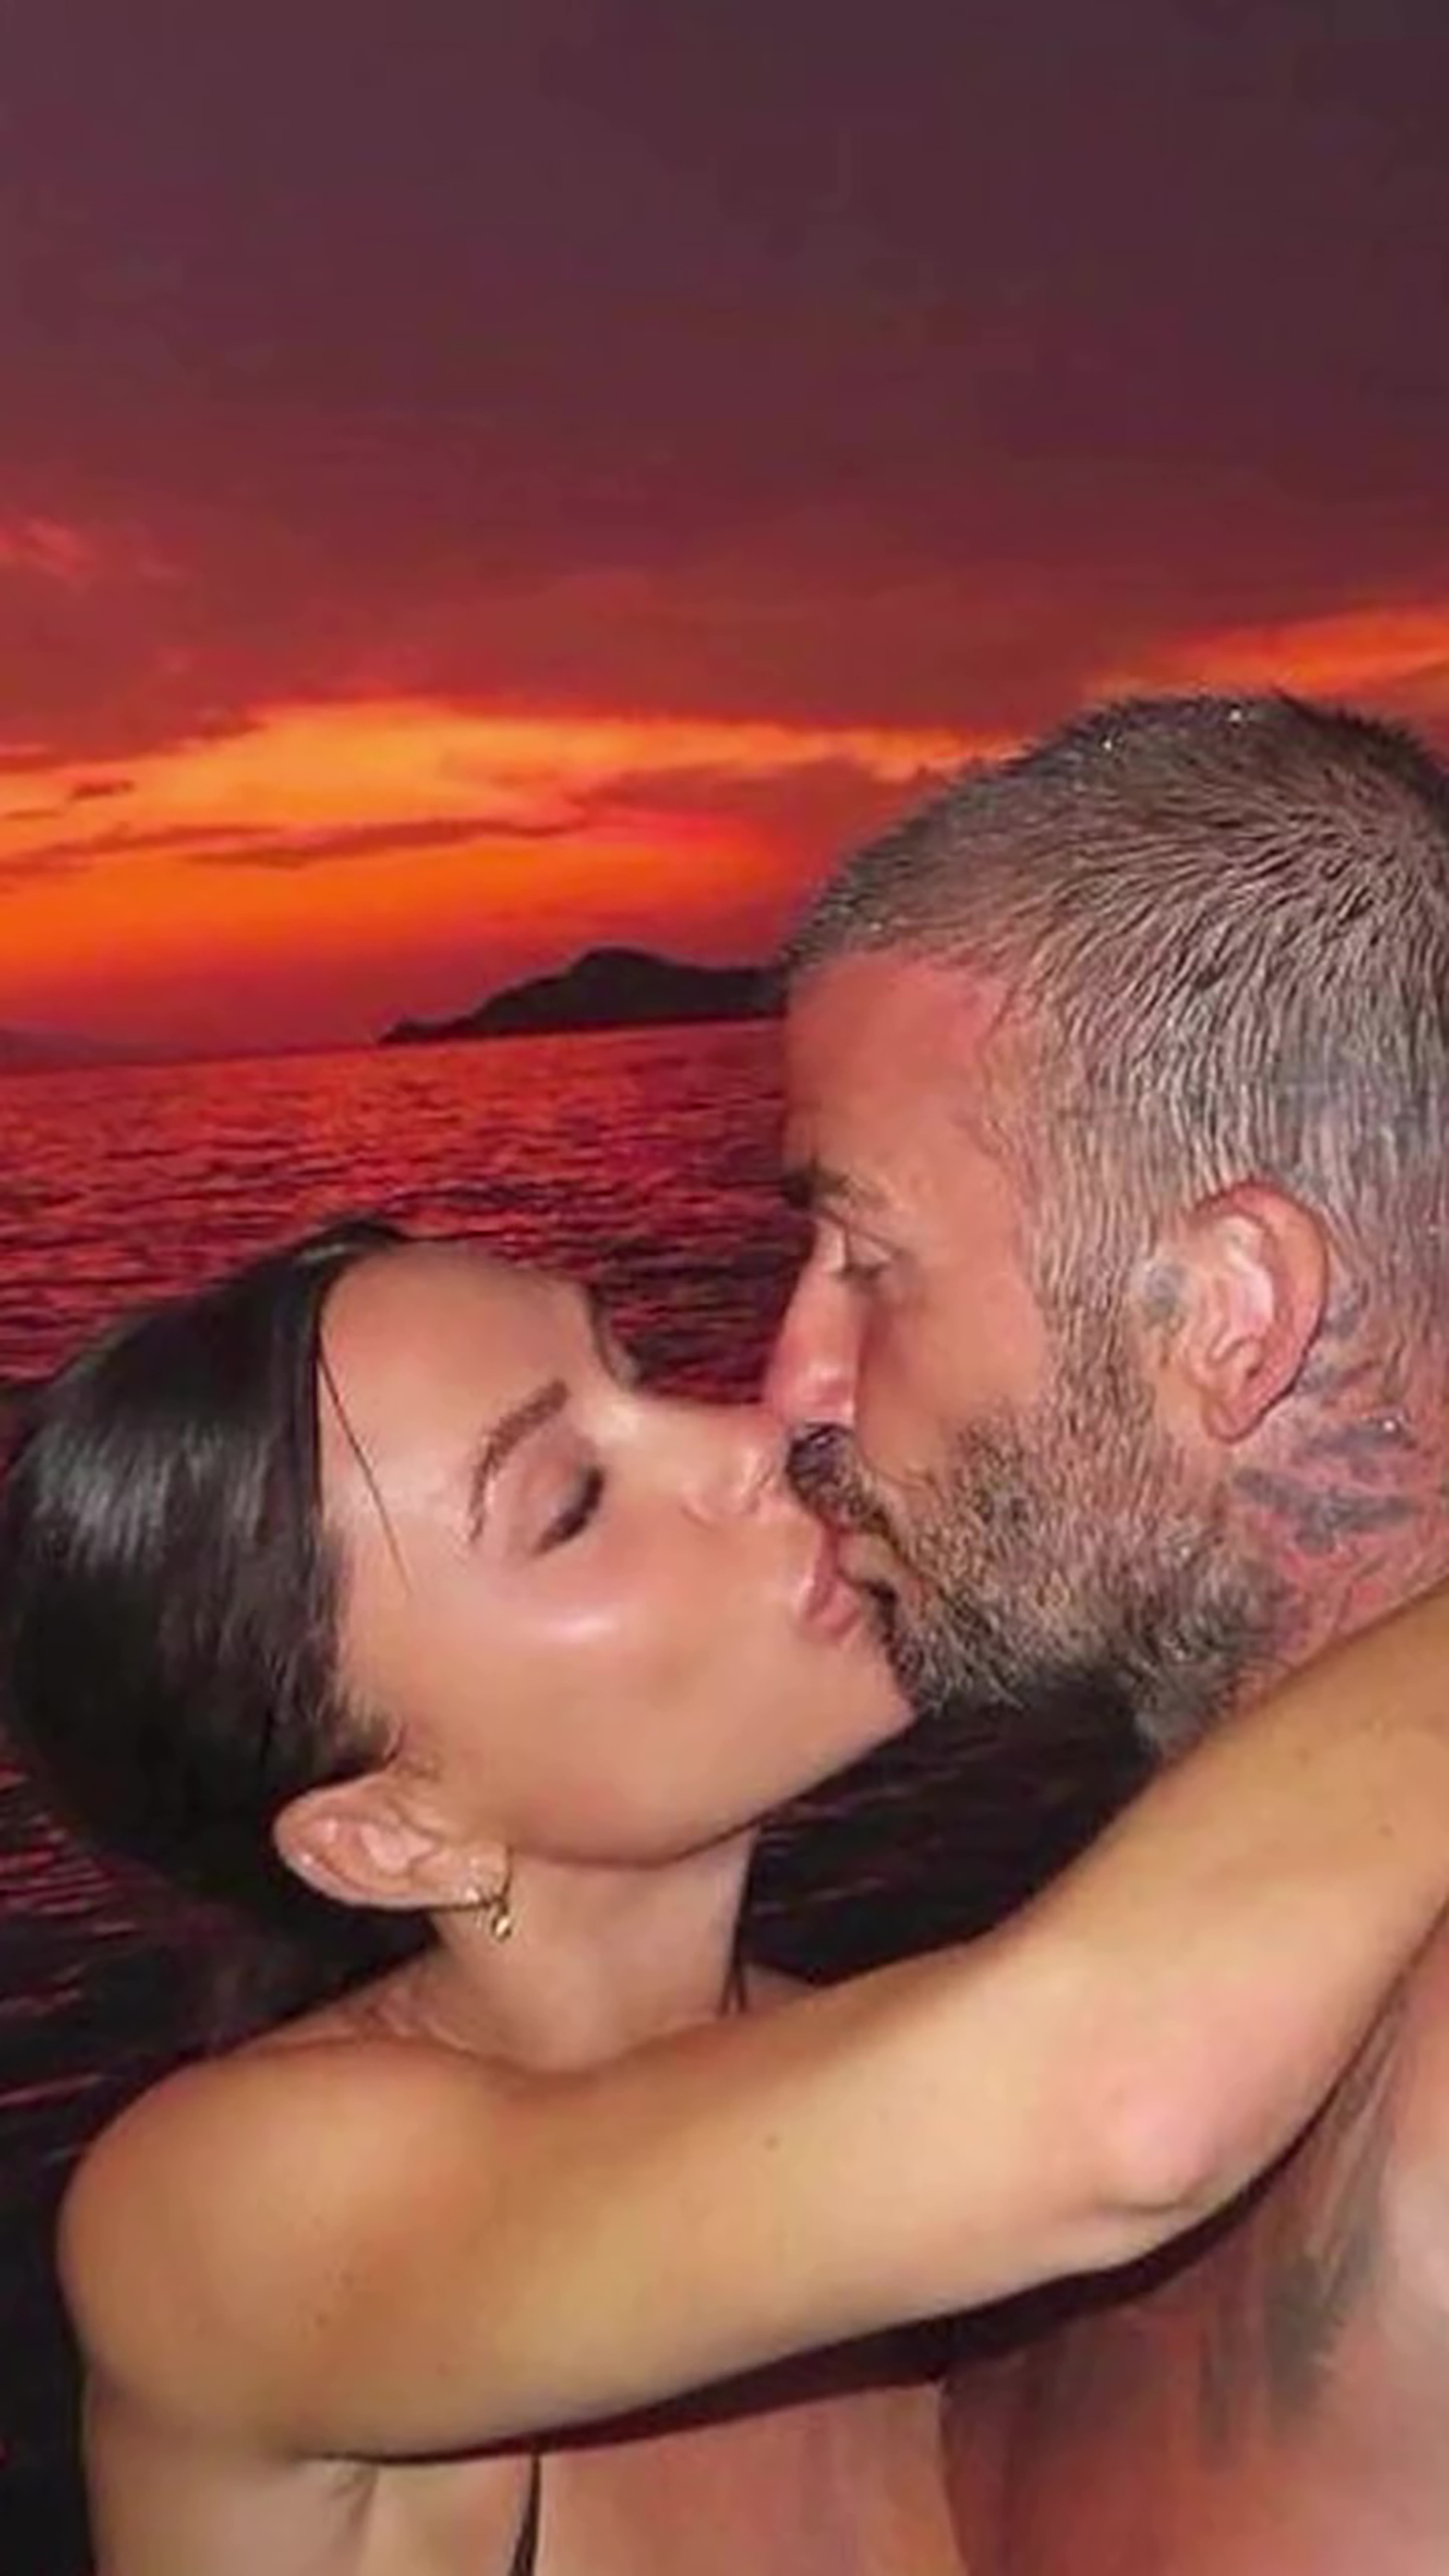 David and Victoria share a romantic kiss in a pic he uploaded to Instagram to celebrate her birthday